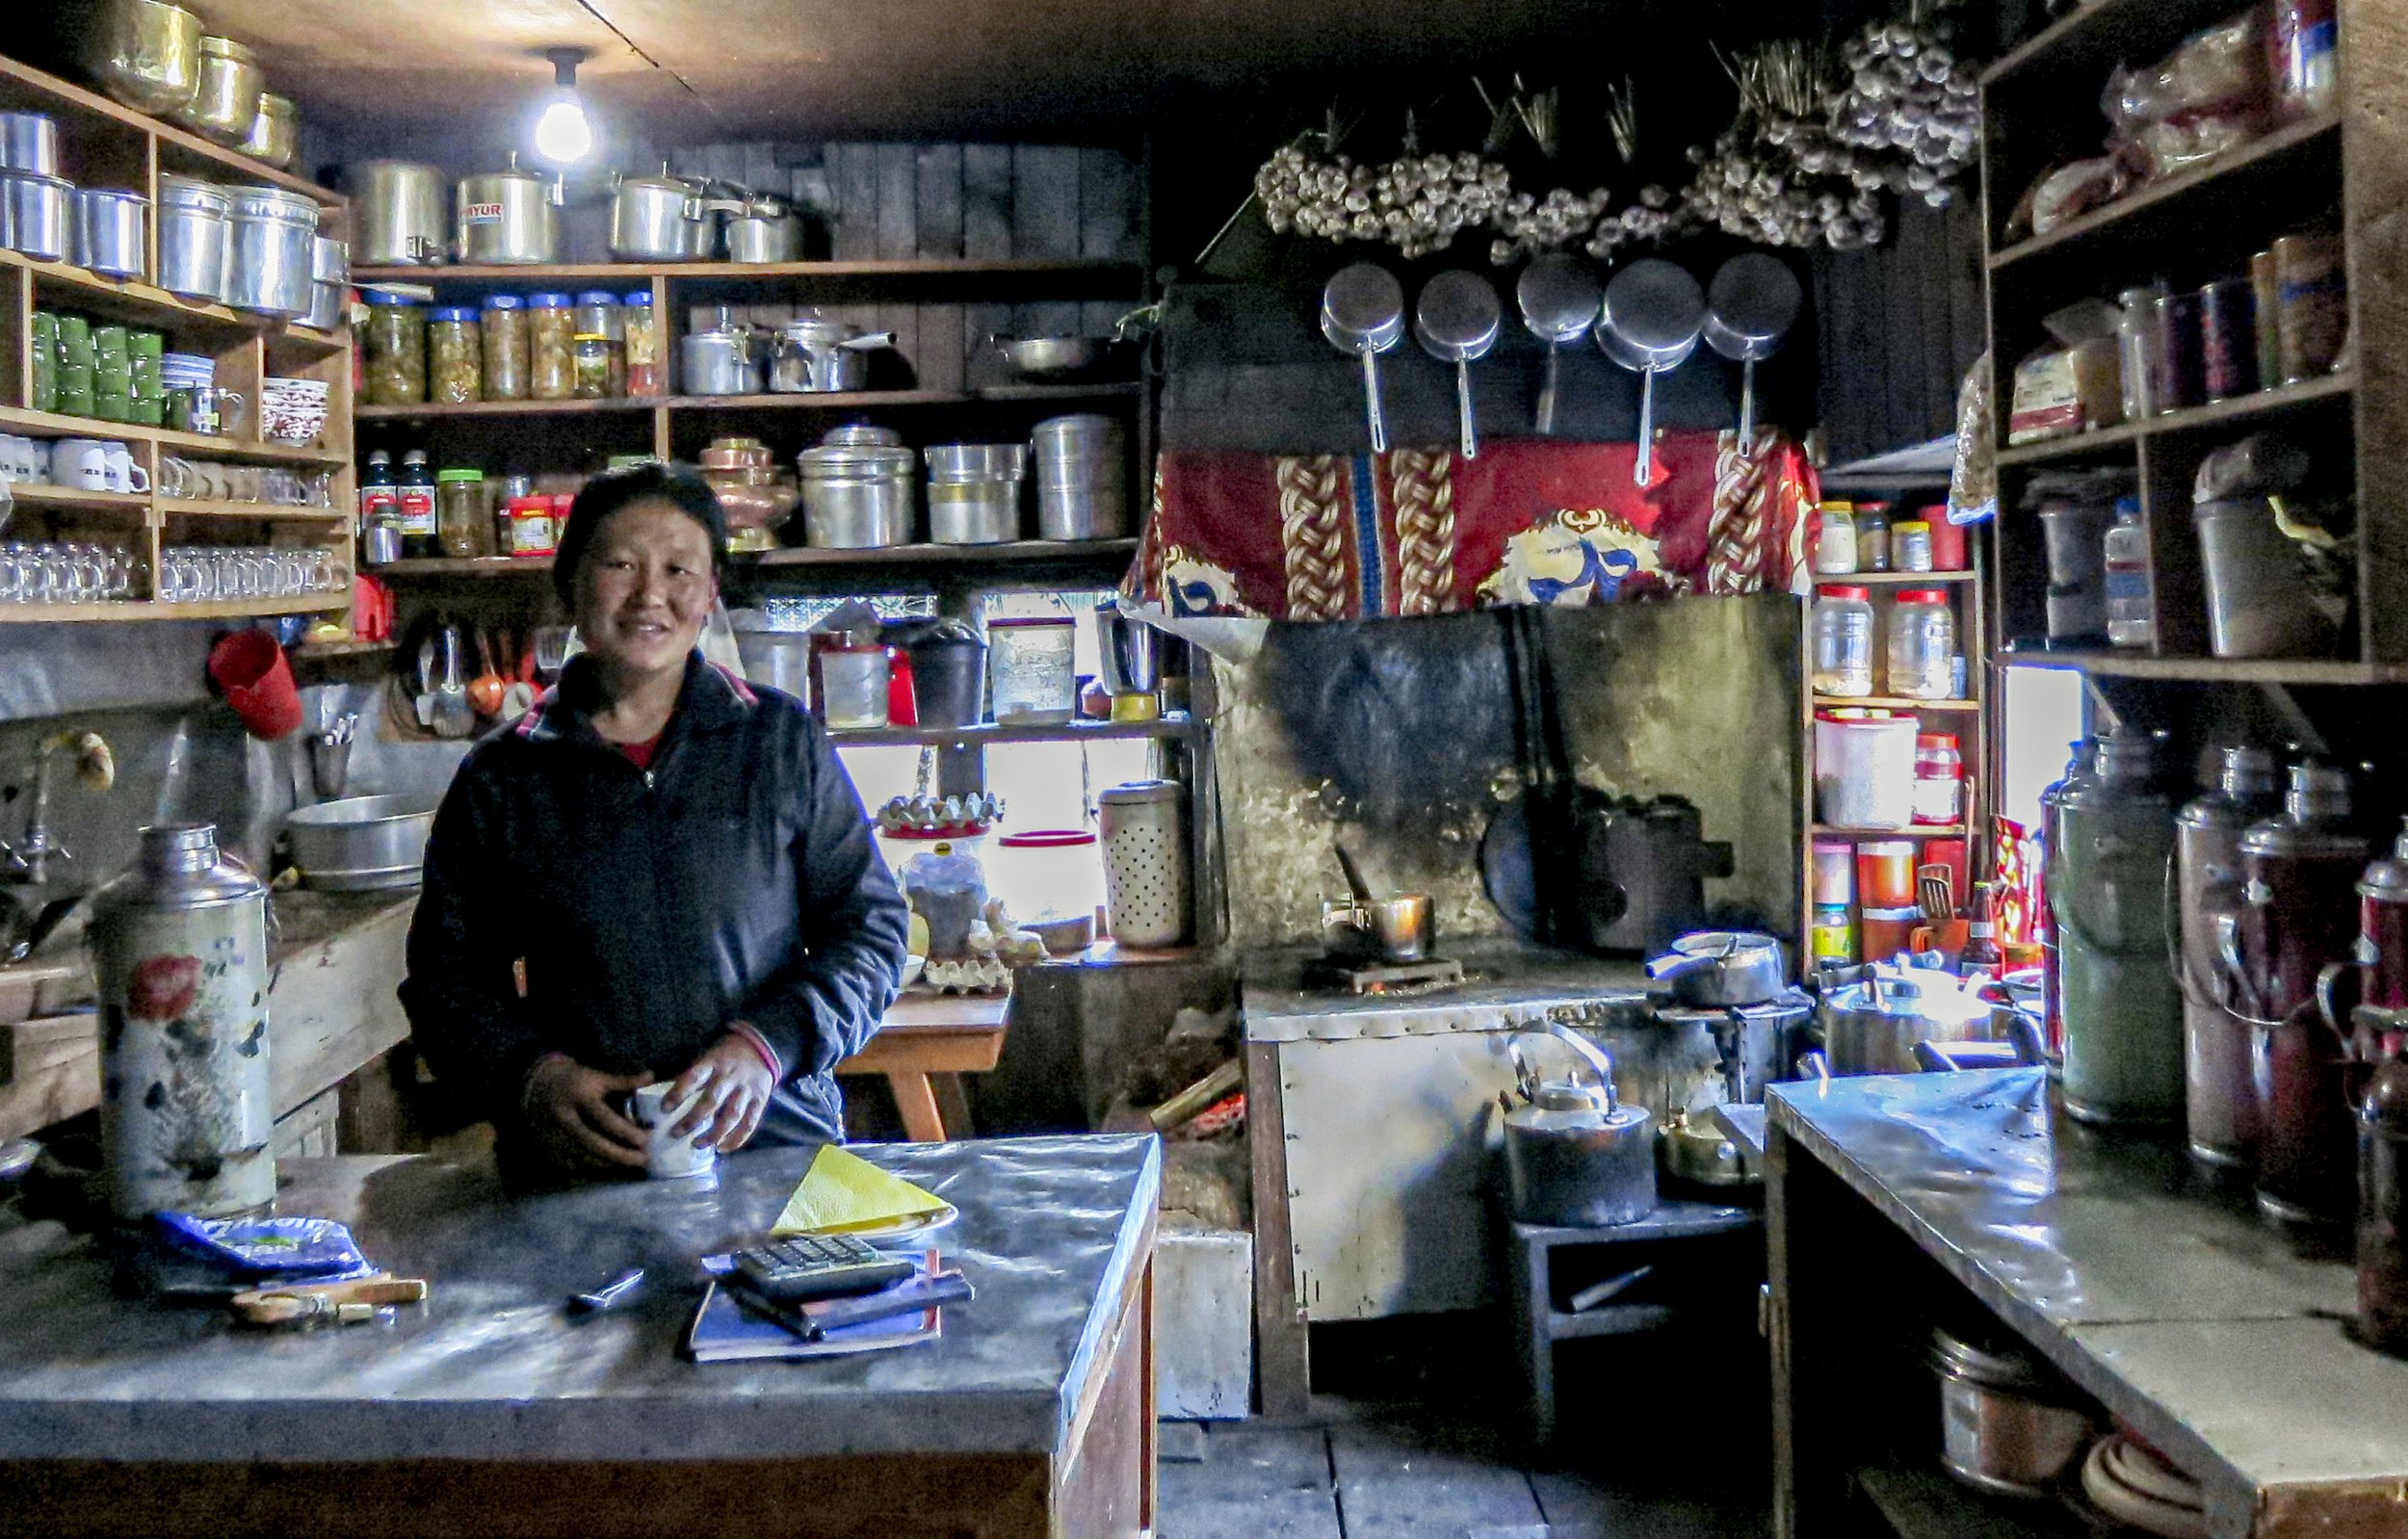  Monjo, Nepal kitchen on the road to Everest base camp.  